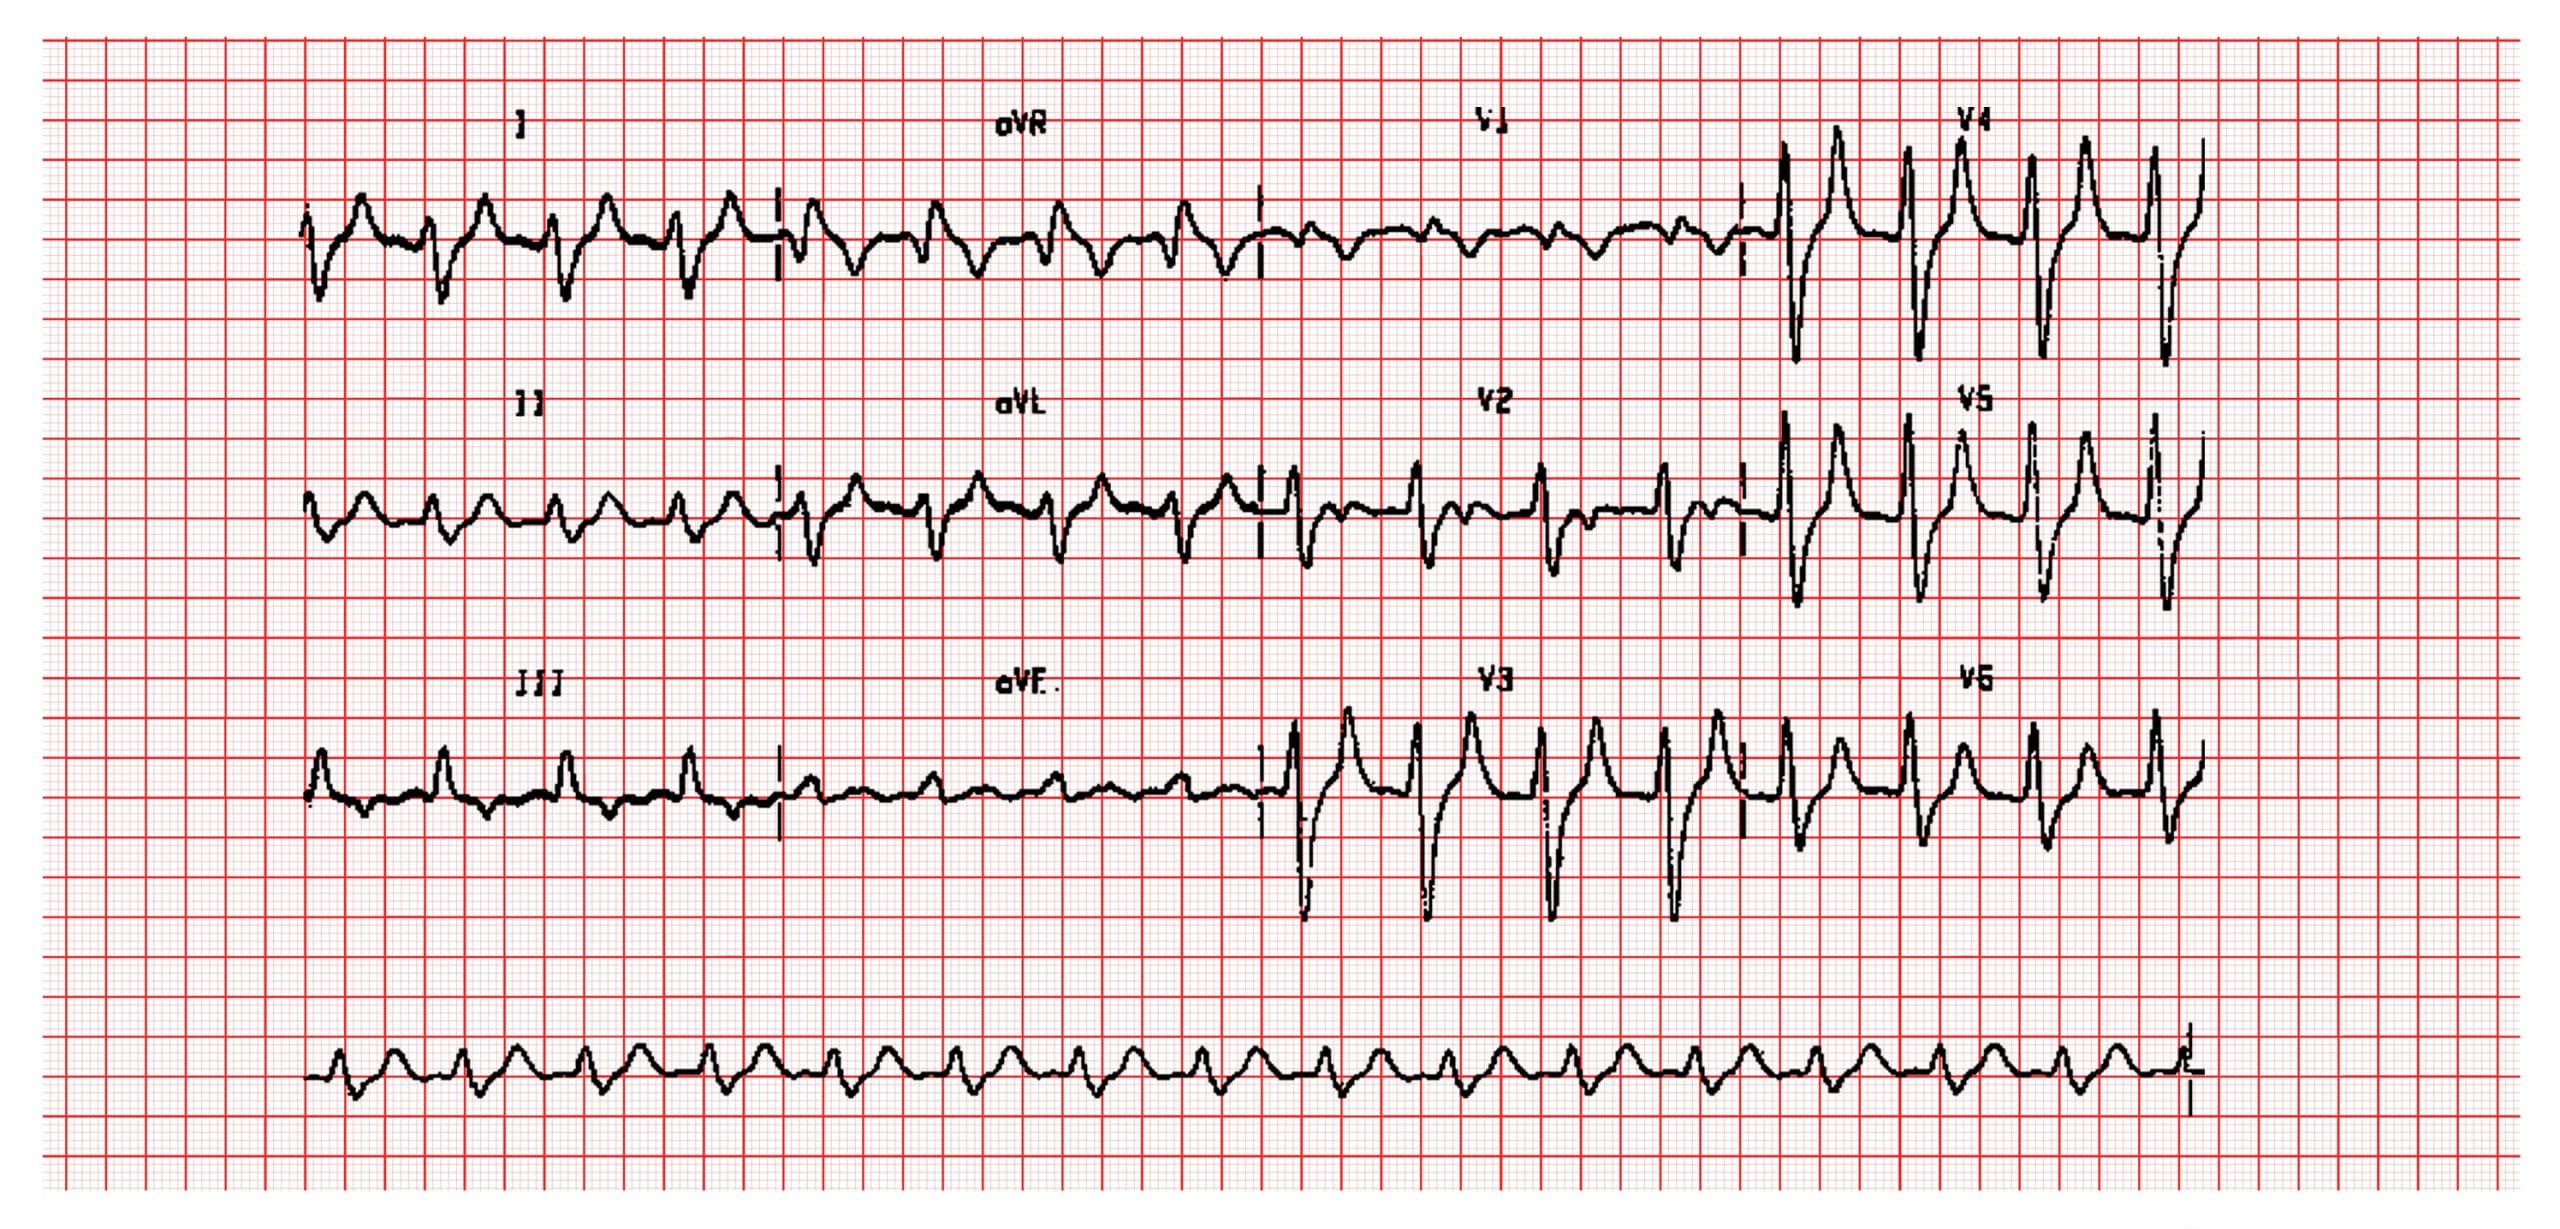 12 lead ECG showing classical changes of reduced P waves and tented T waves in hyperkalaemia